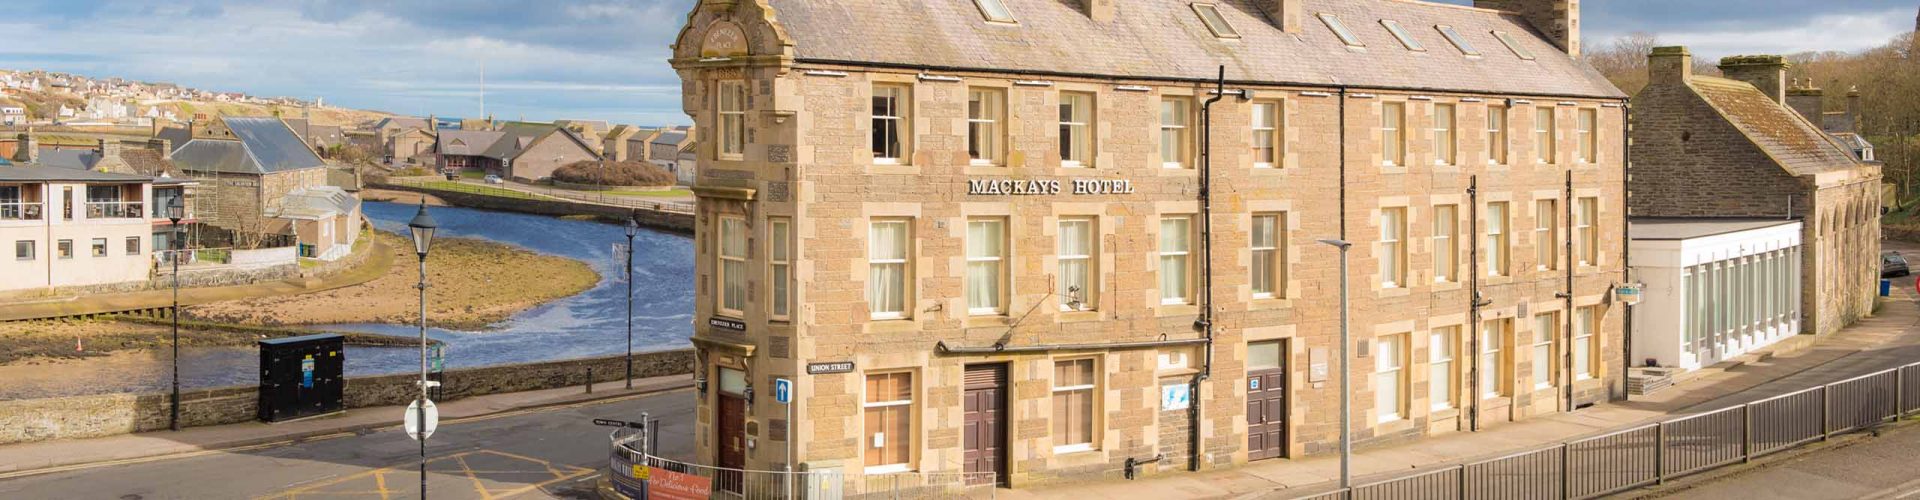 Mackays Hotel exterior on a beautiful bright winters day